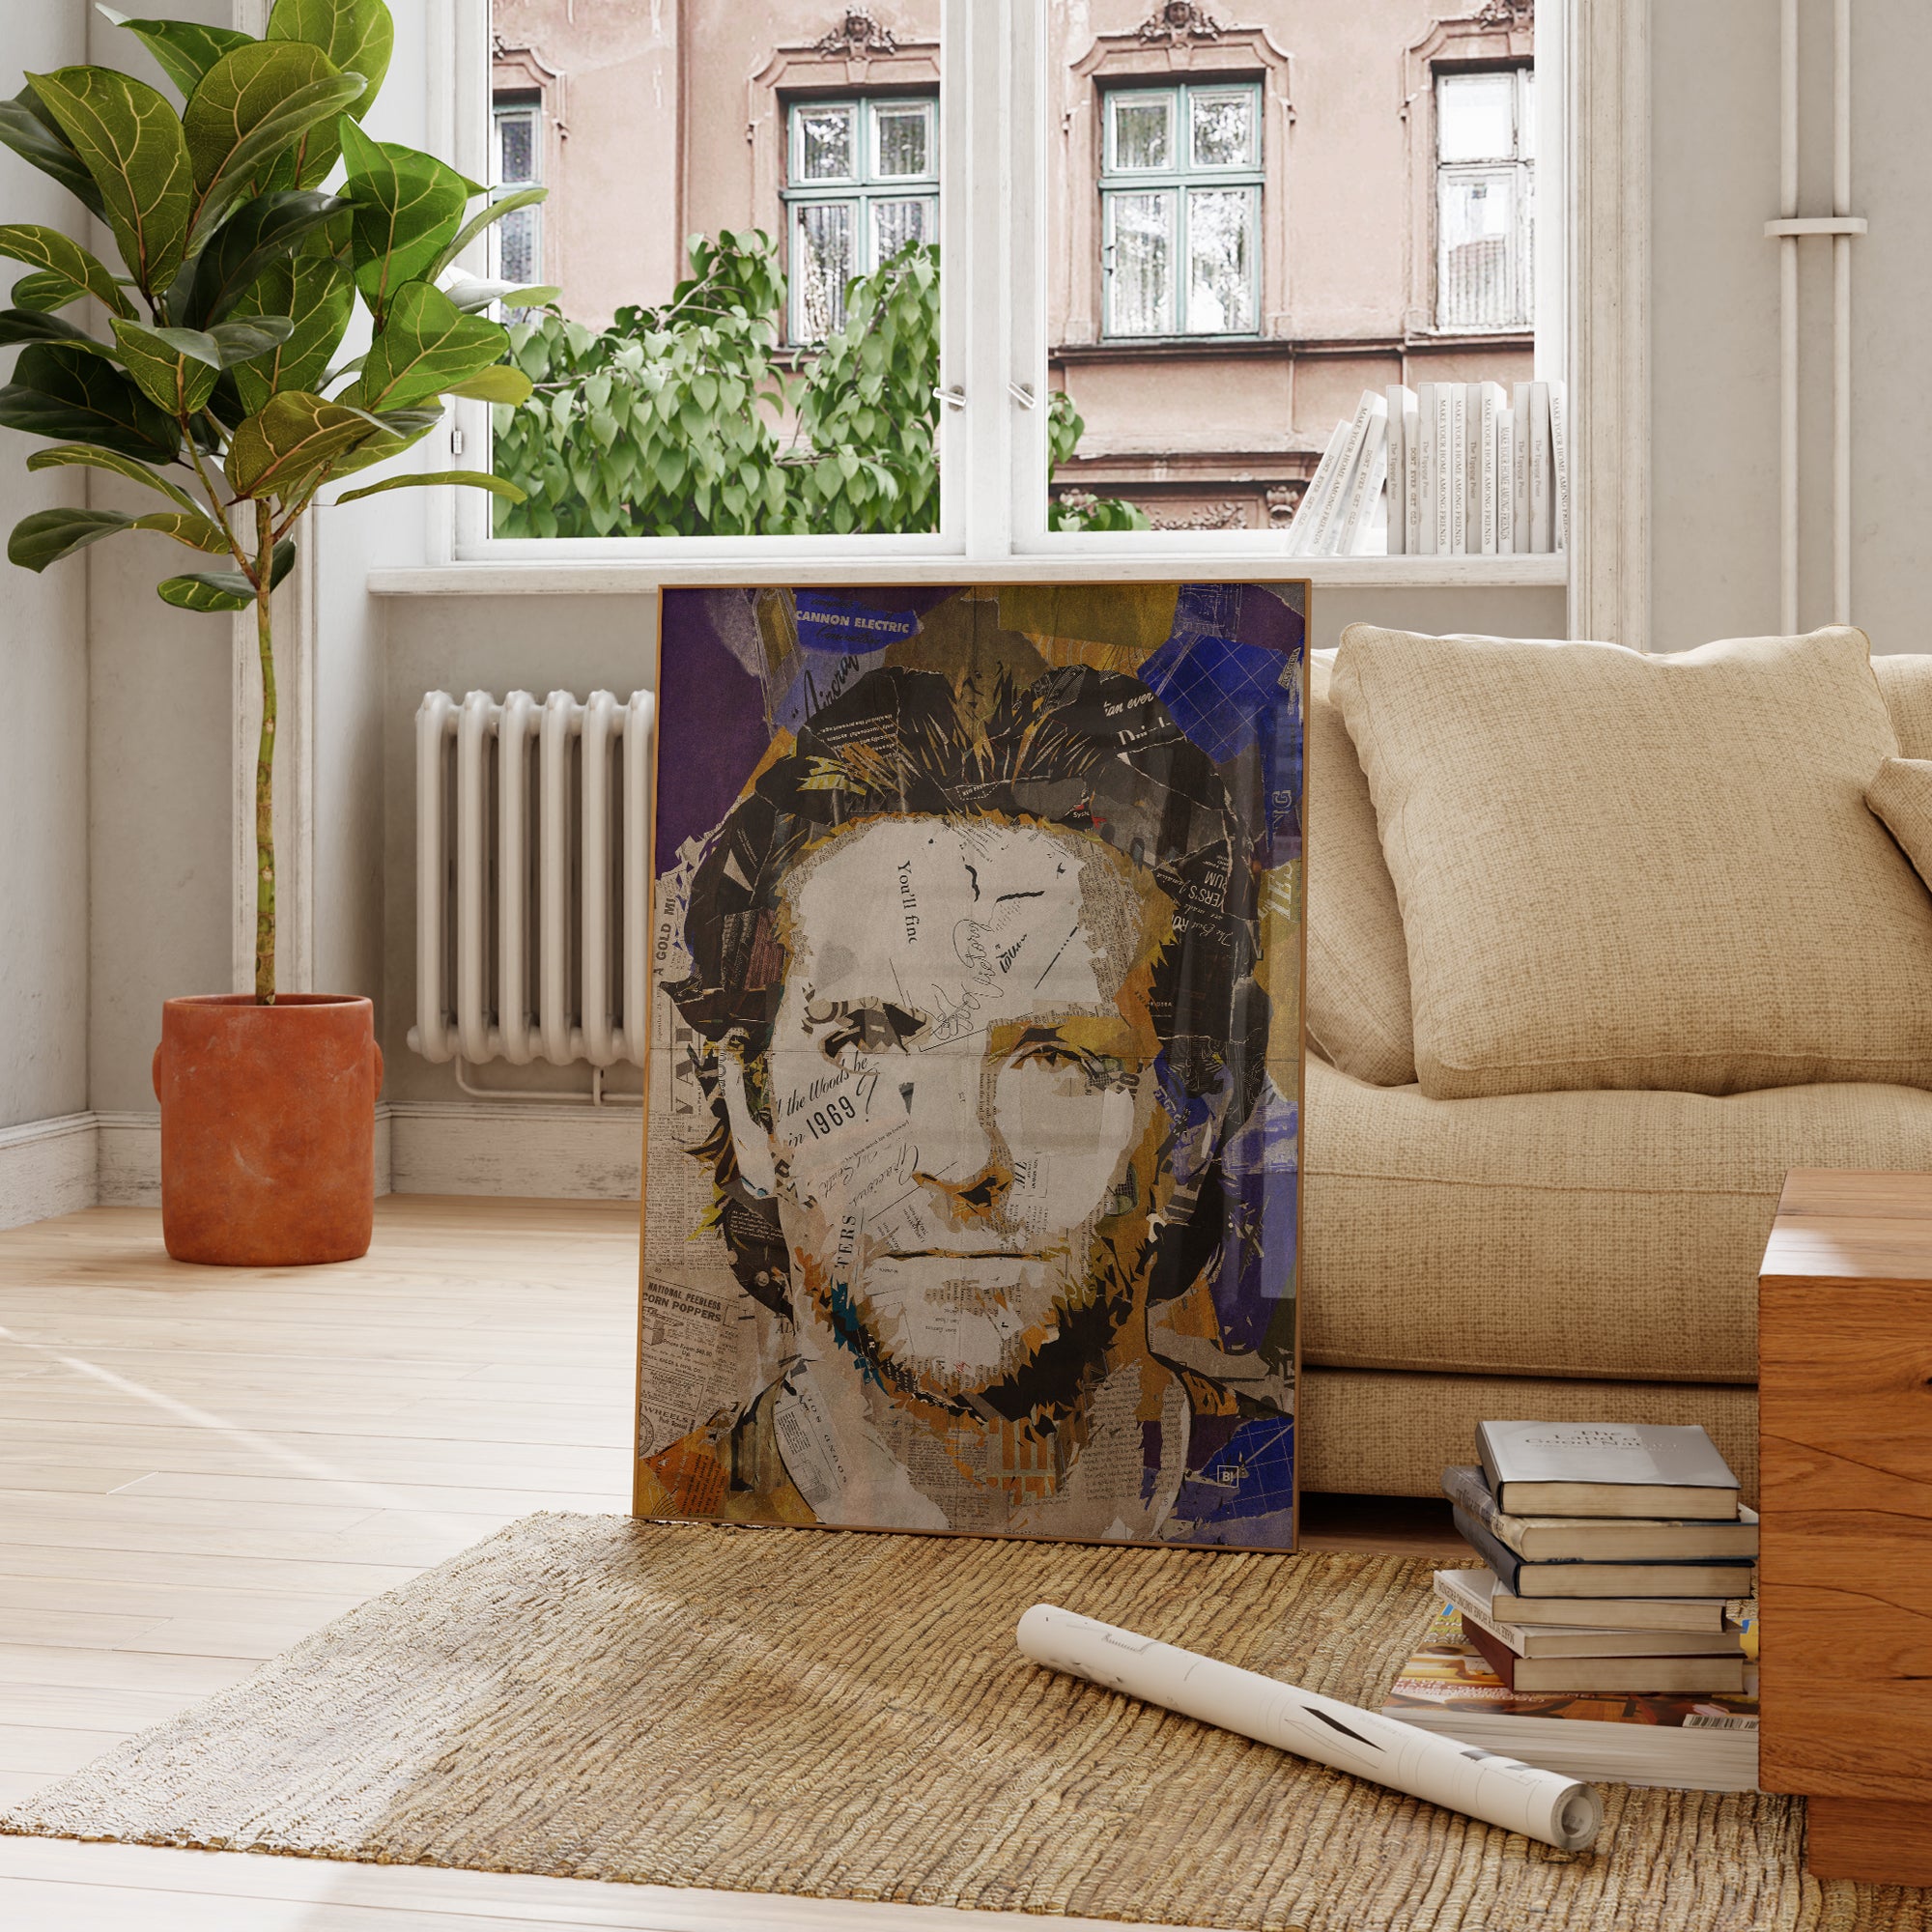 Be inspired by our iconic collage portrait art print of Bradley Cooper. This artwork was printed using the giclée process on archival acid-free paper and is presented in a French living room, capturing its timeless beauty in every detail.